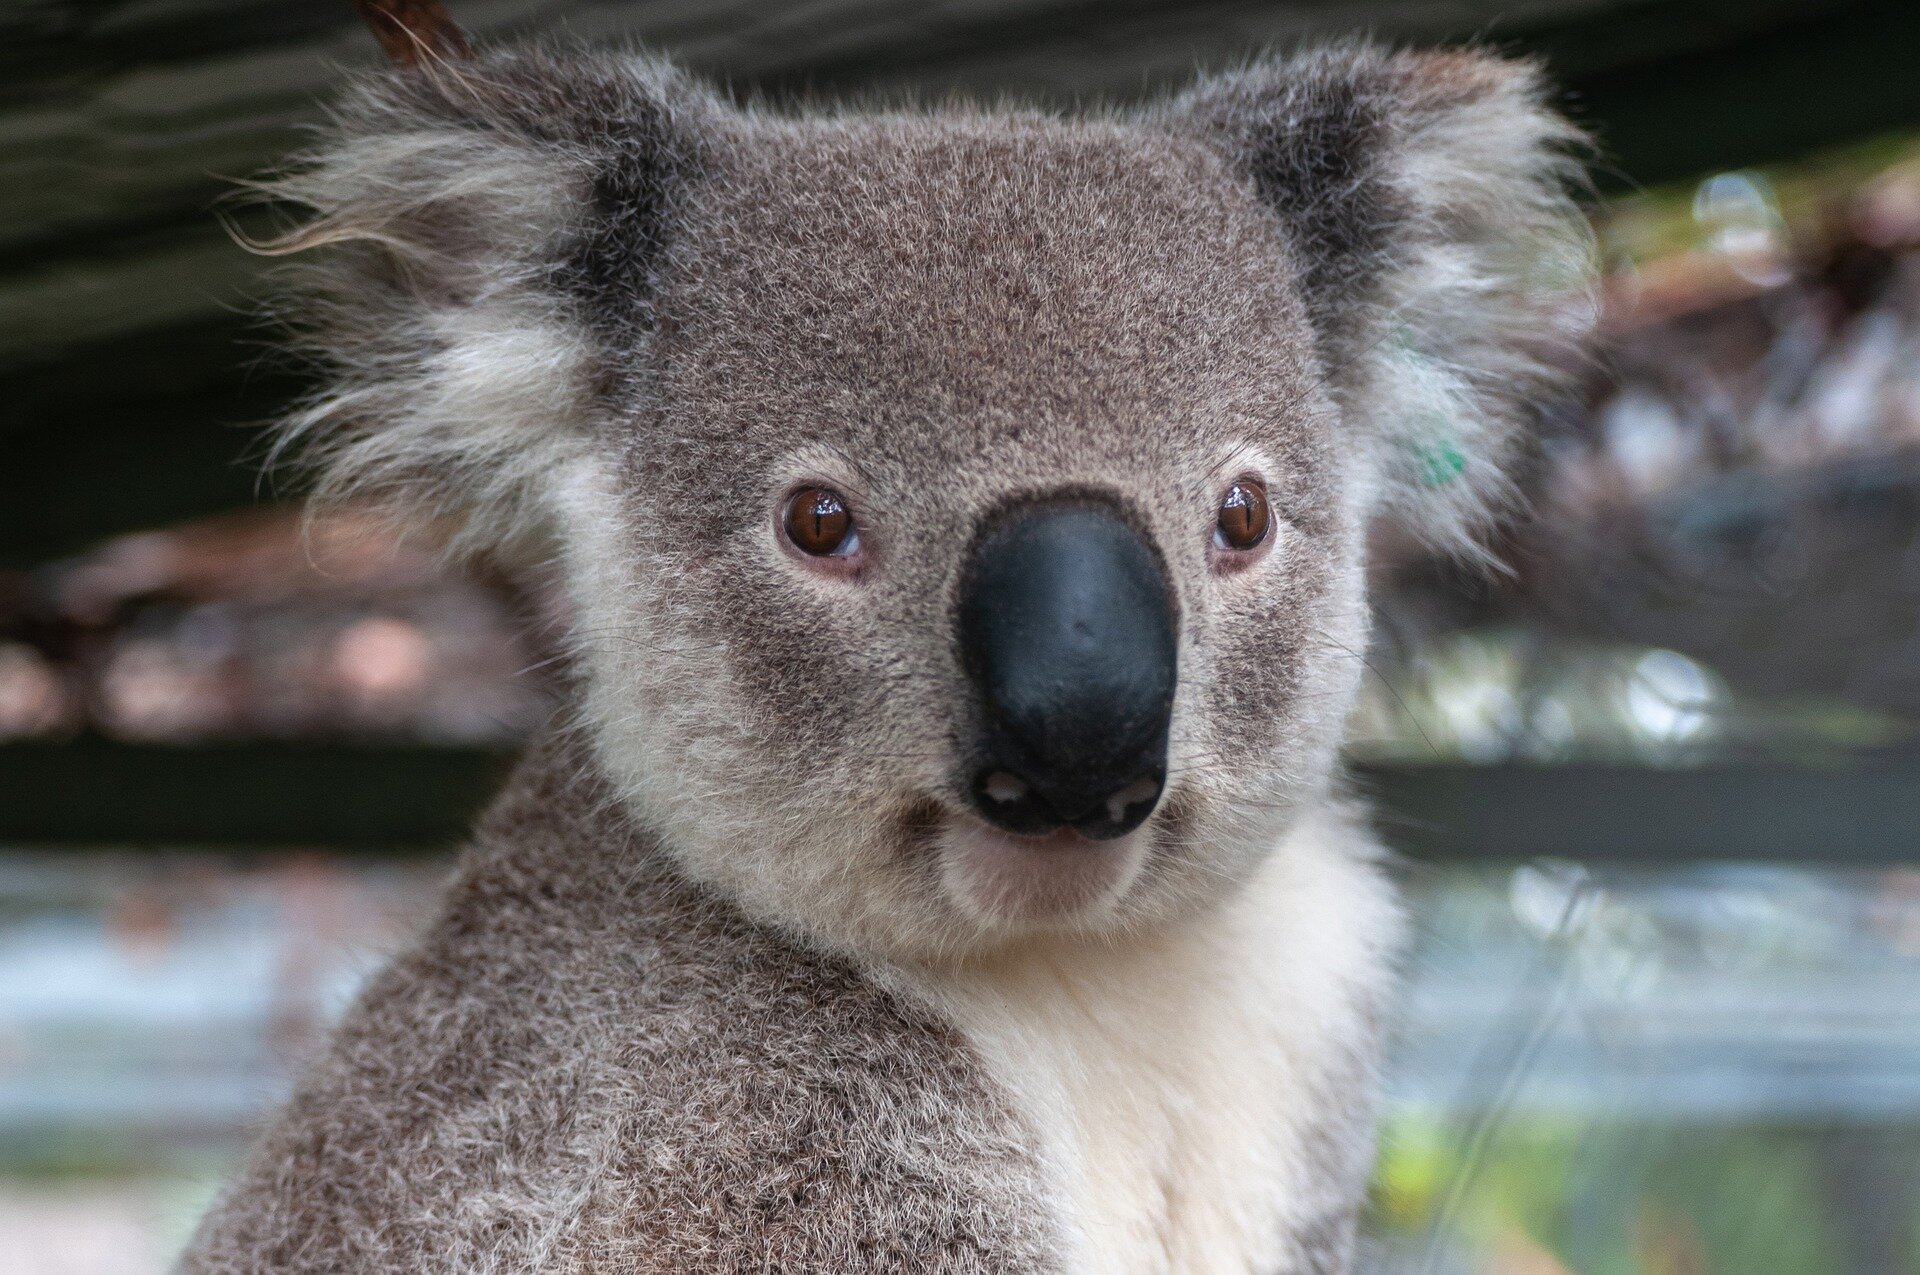 Illumina and the San Diego Zoo are sequencing koala genomes to